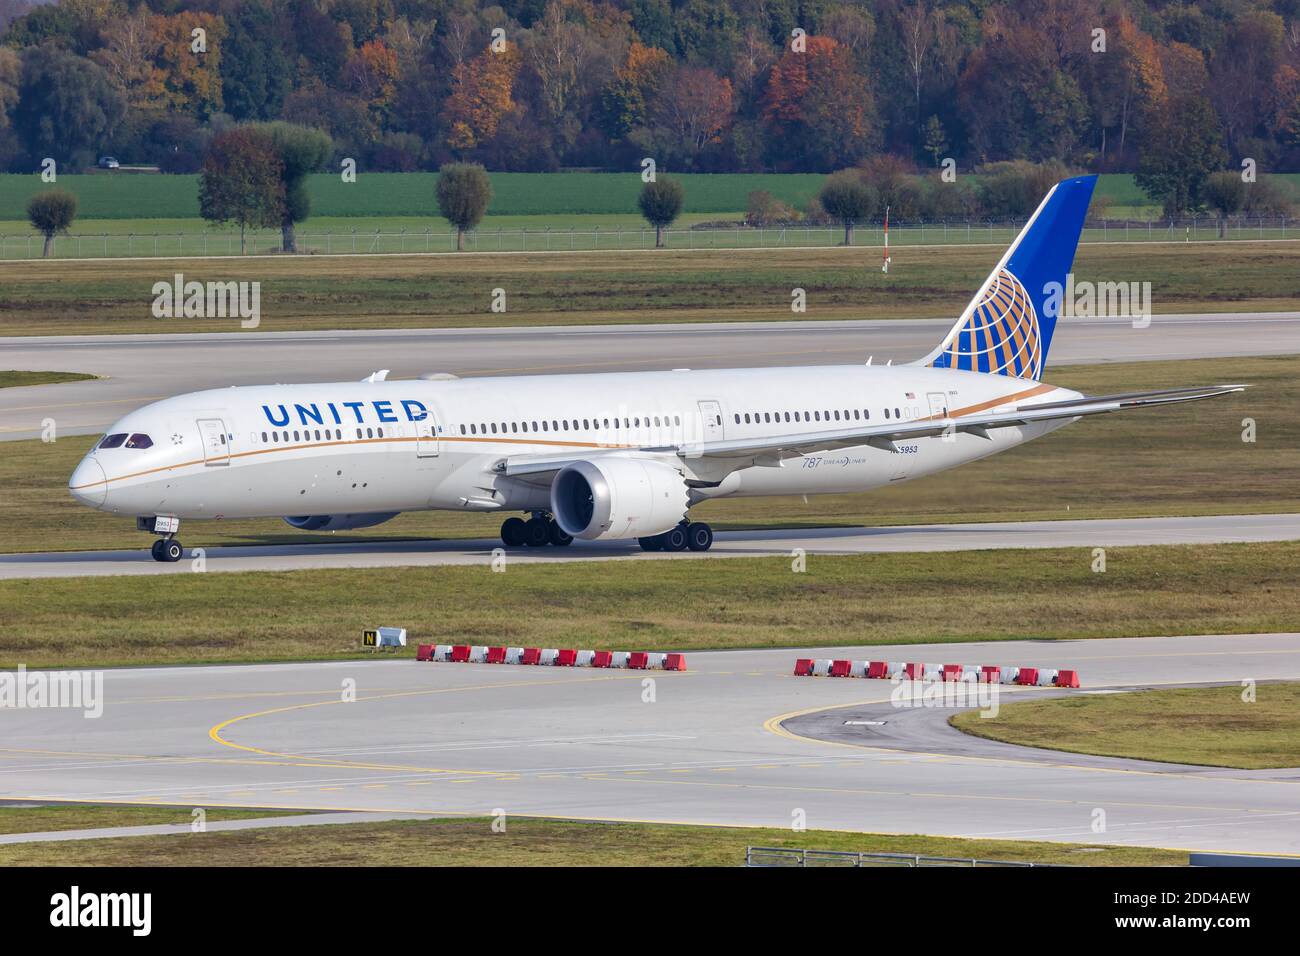 Munich, Germany - October 21, 2020: United Airlines Boeing 787-9 Dreamliner airplane at Munich Airport in Germany. Stock Photo